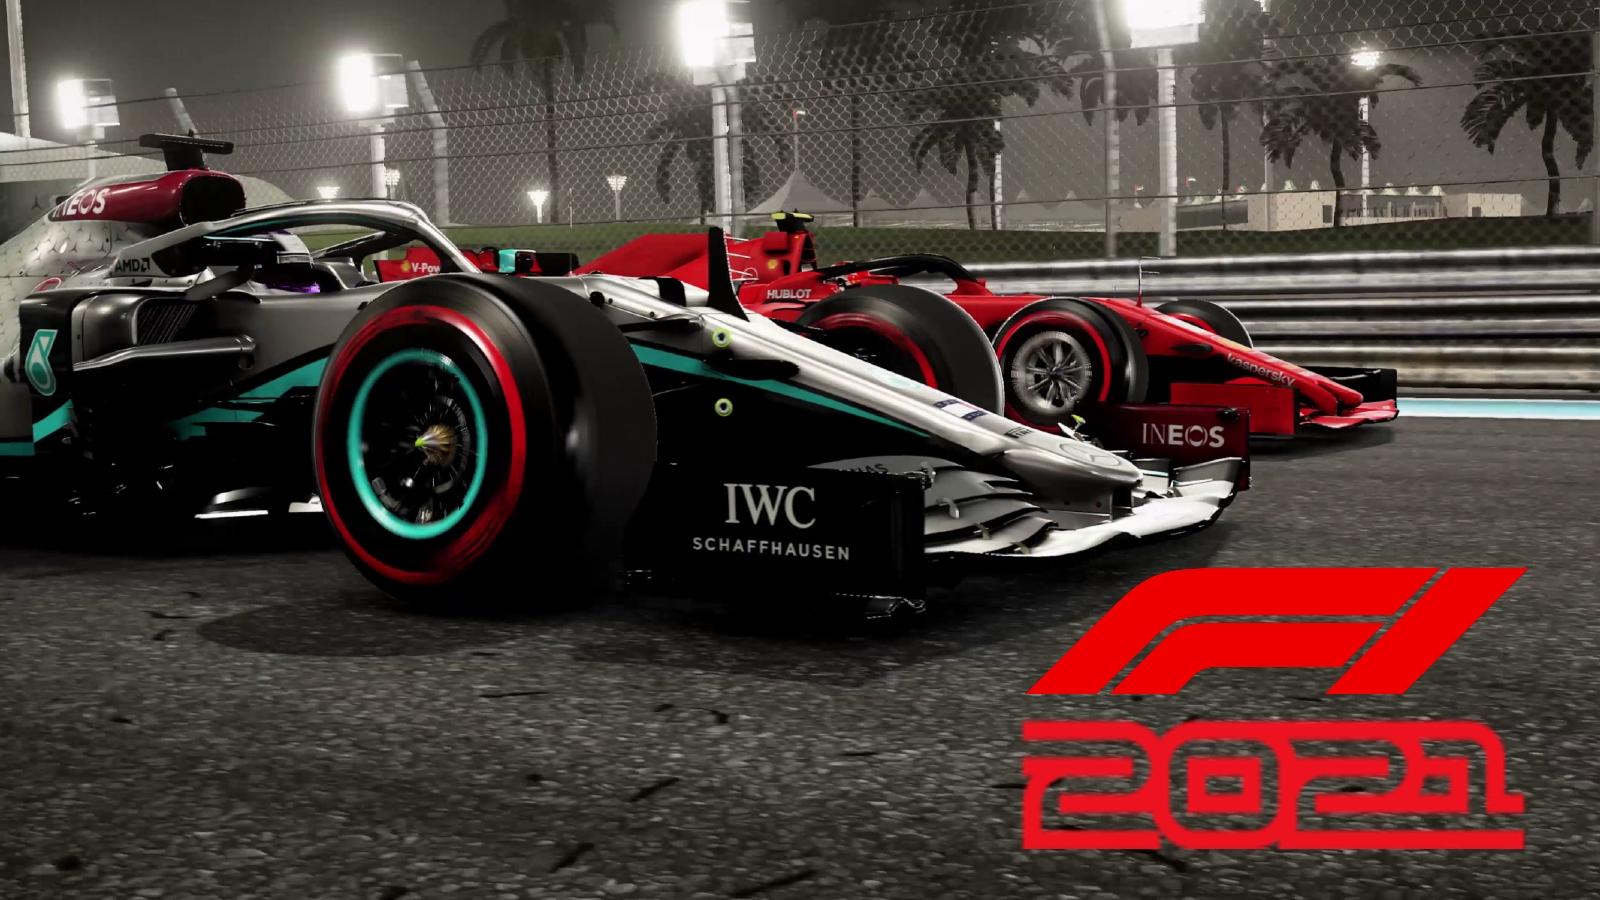 F1 2021 game: Release access, date, trailer, - Team EA early Dexerto Play, My